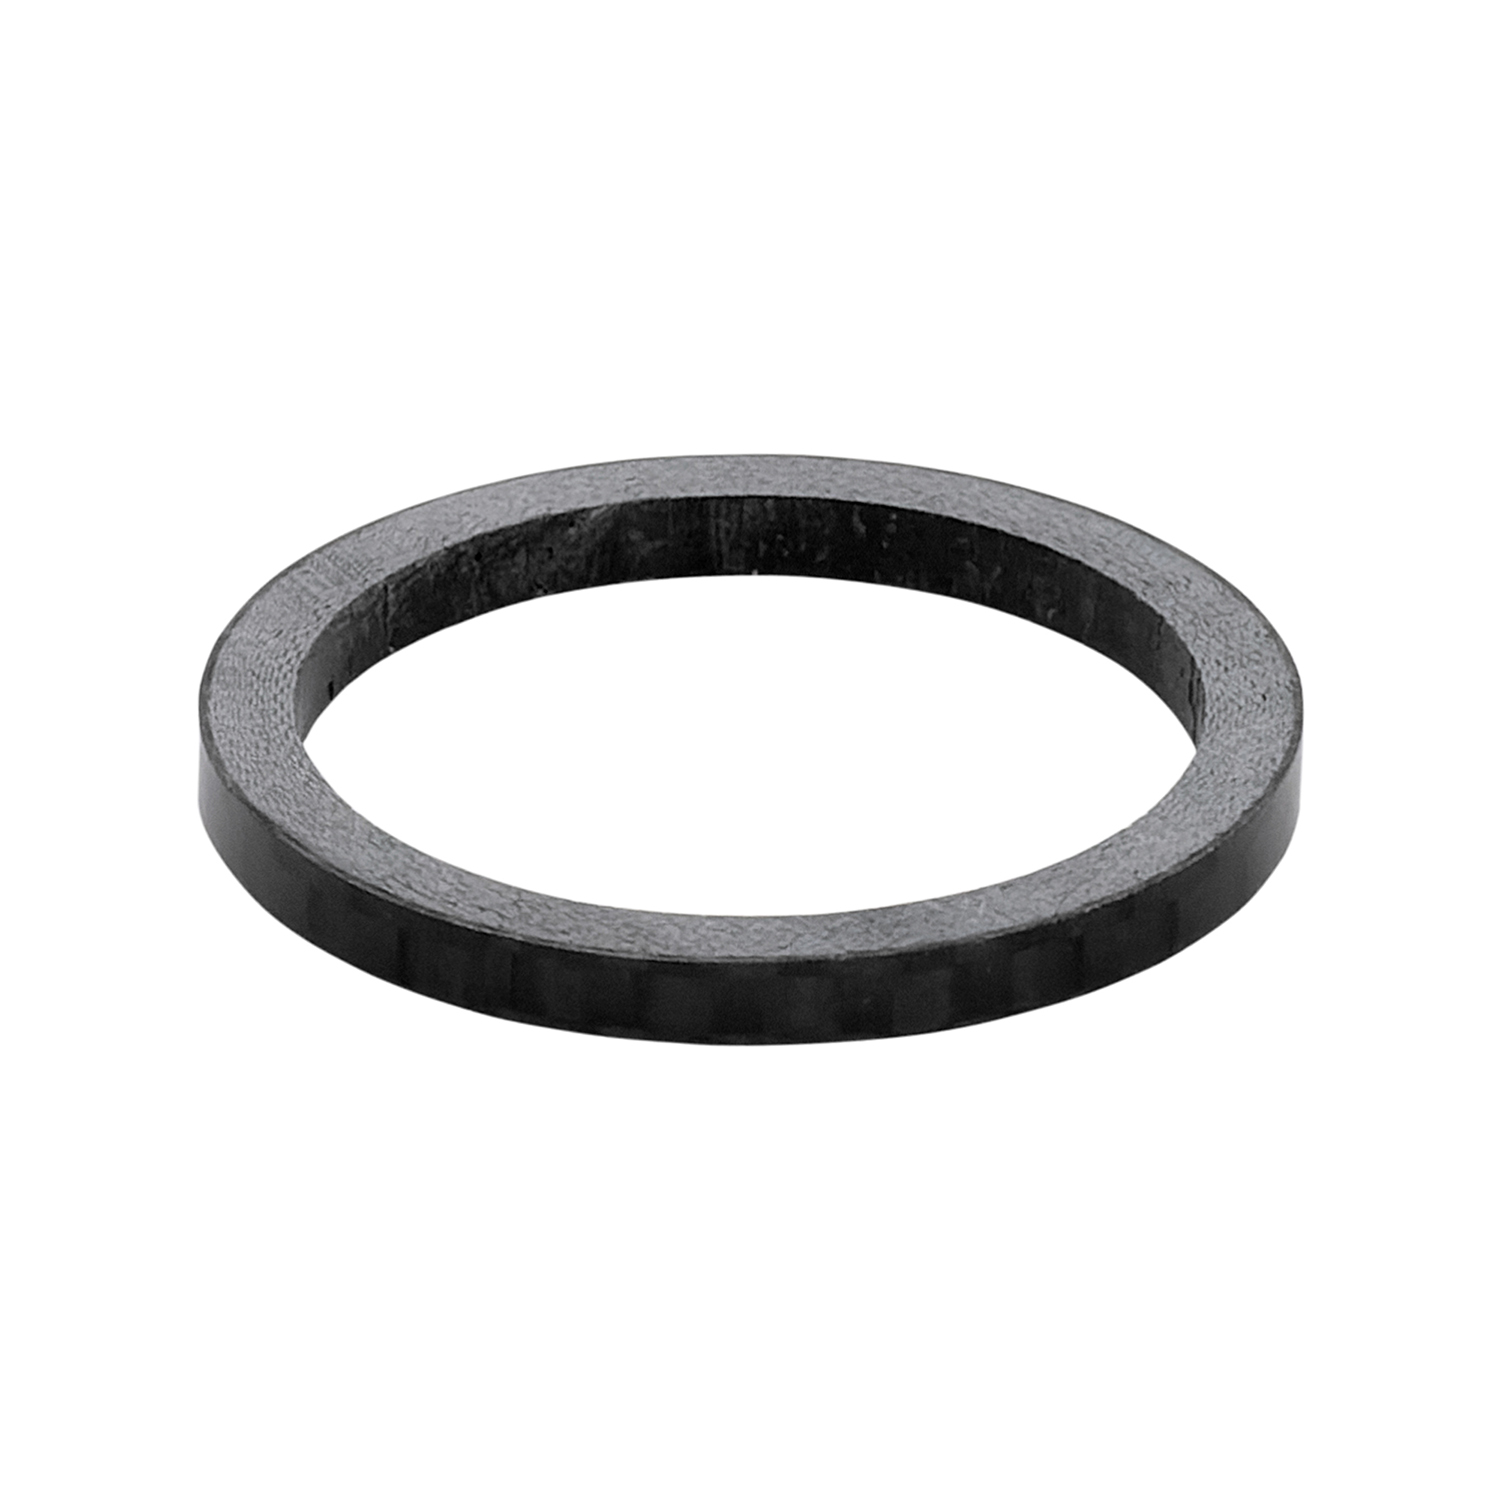 Spacer Carbon, 3 mm, 1 1/8"